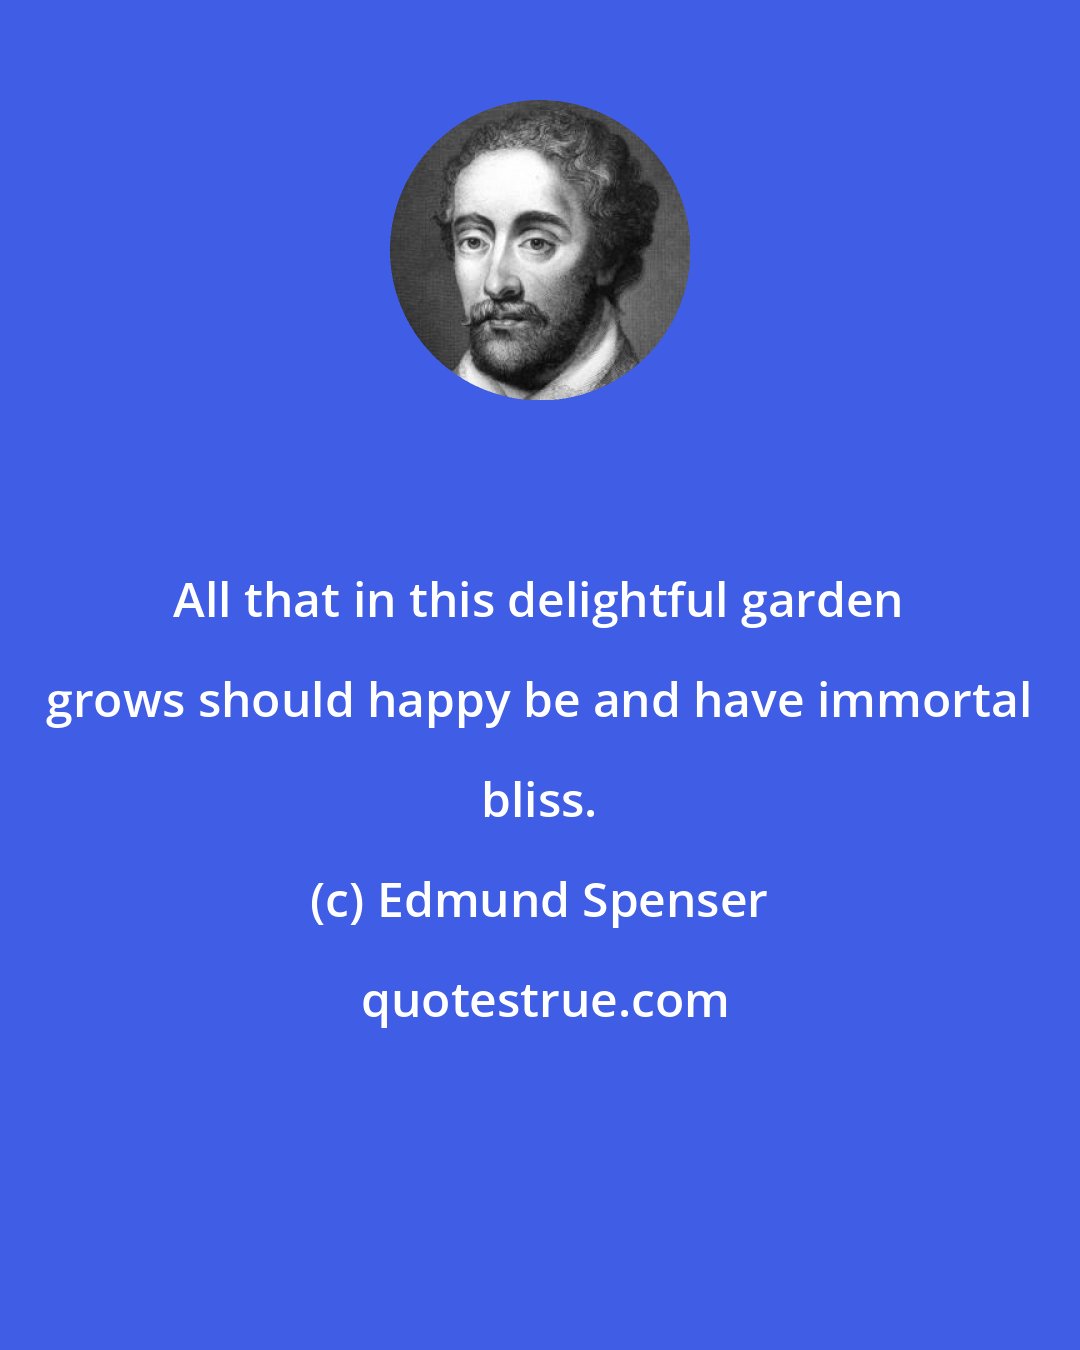 Edmund Spenser: All that in this delightful garden grows should happy be and have immortal bliss.